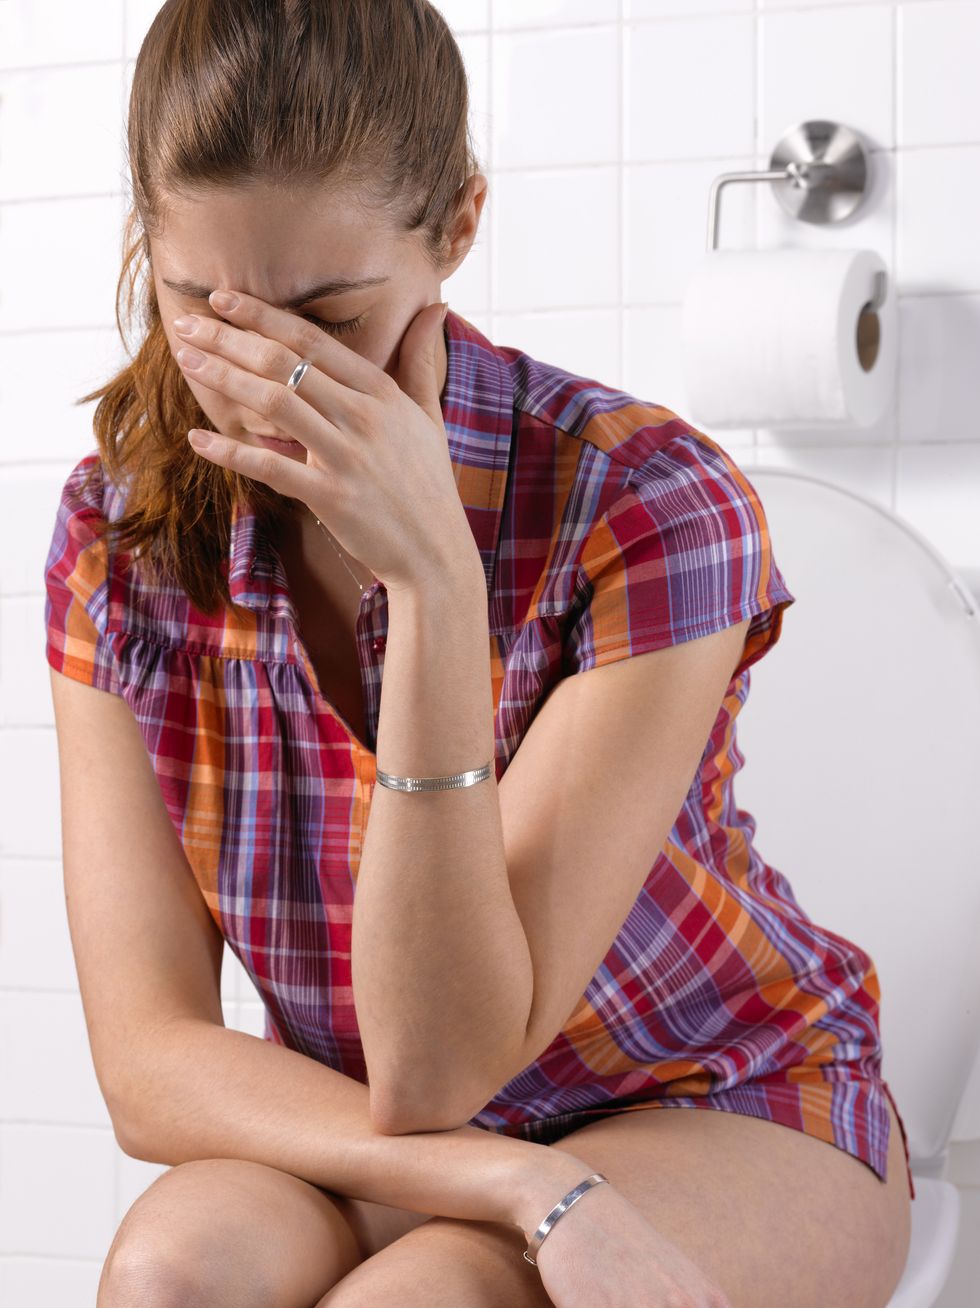 girl with constipation ibs in bathroom